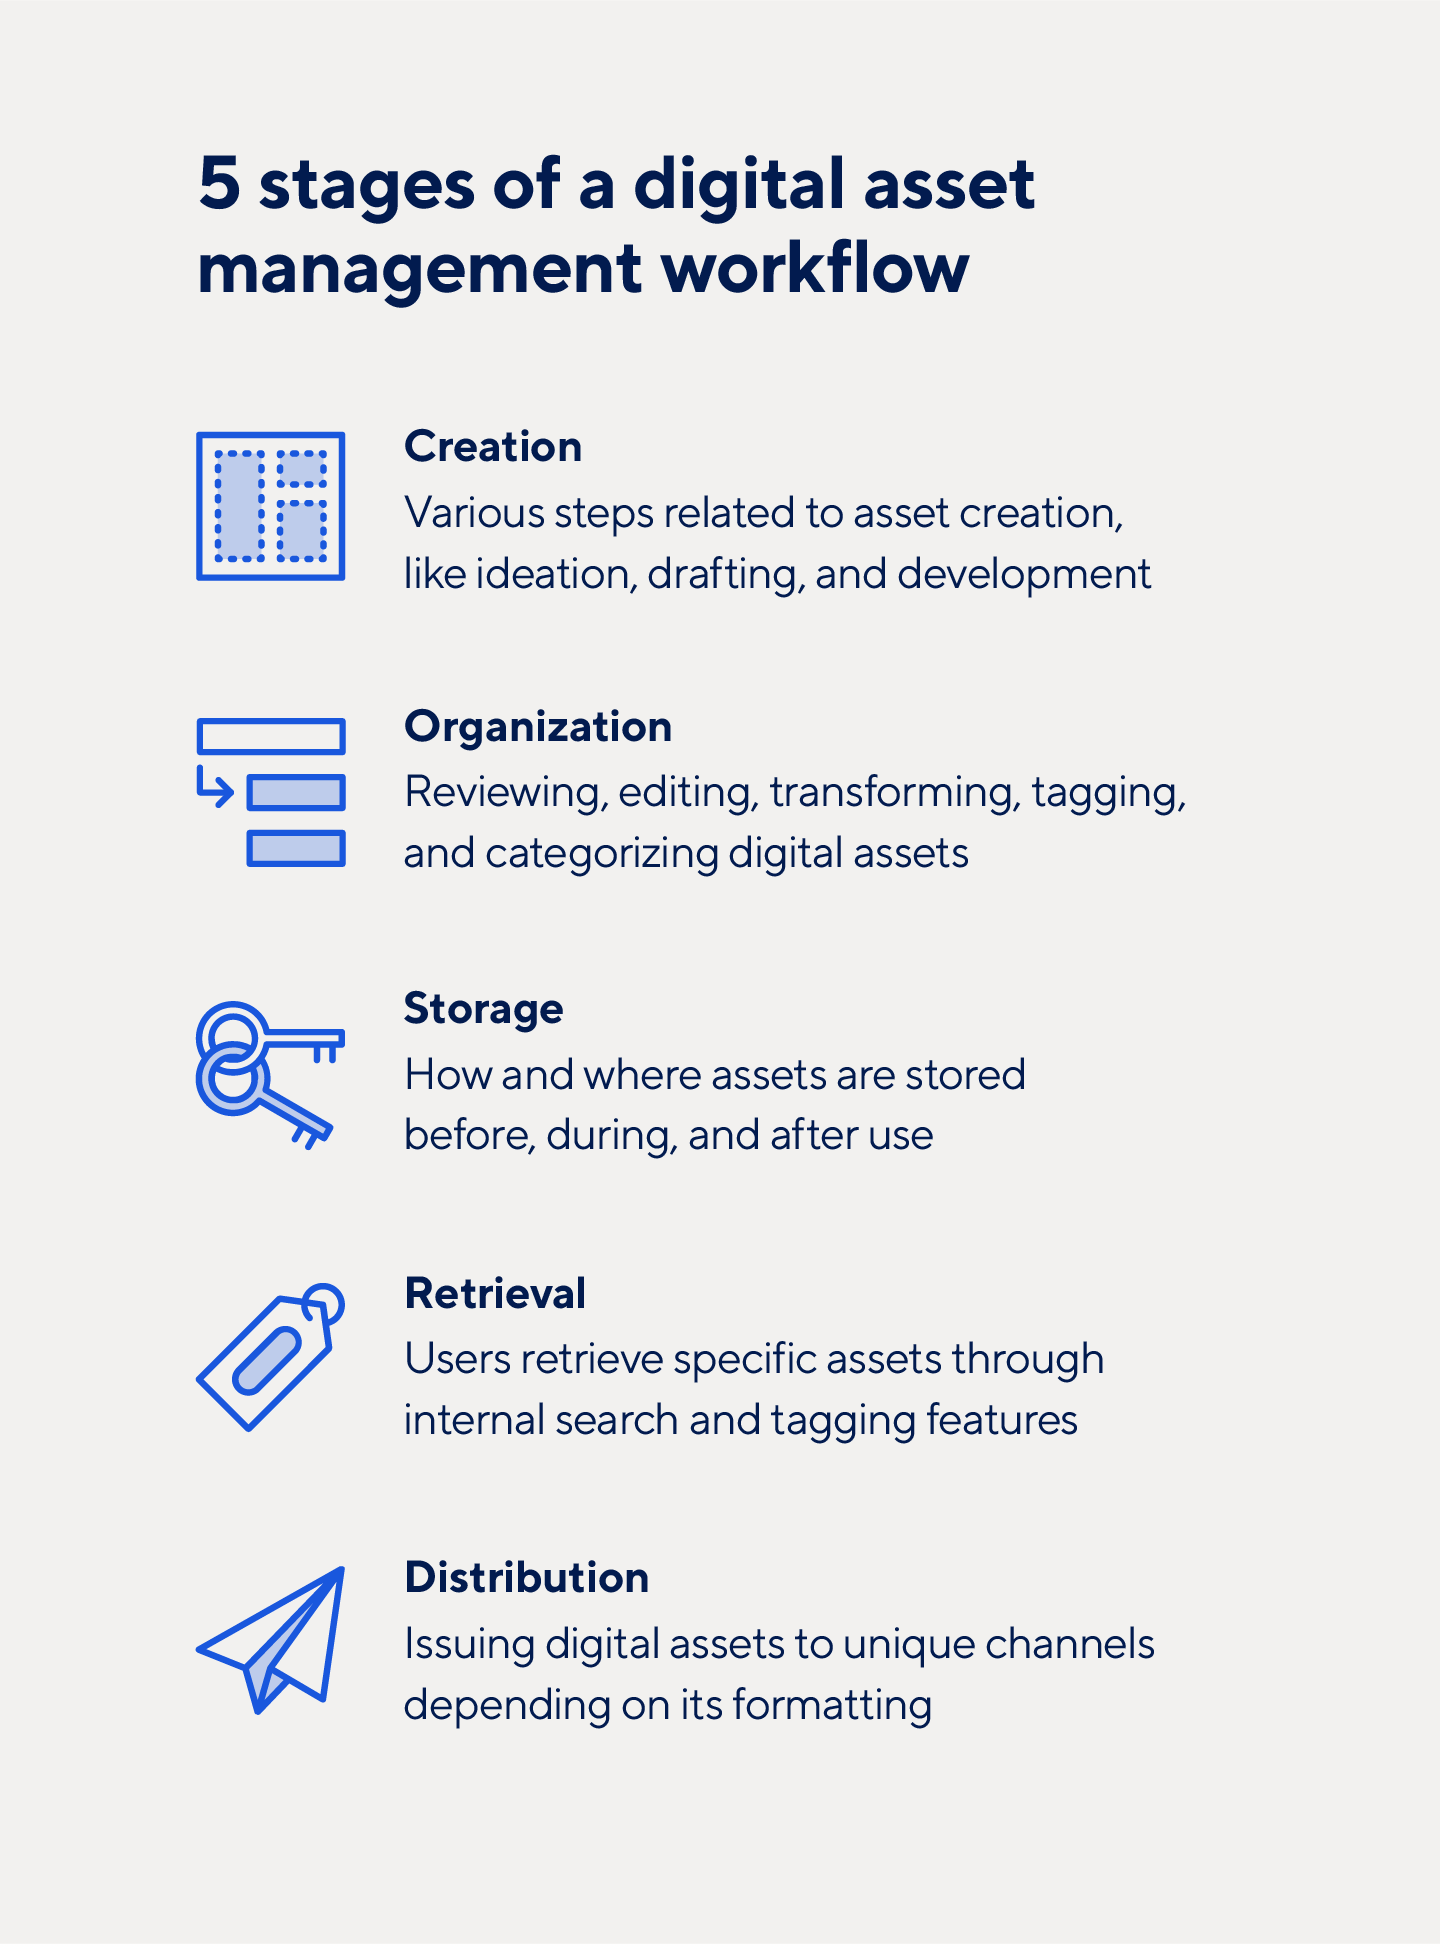 There are five stages in a digital asset management workflow.